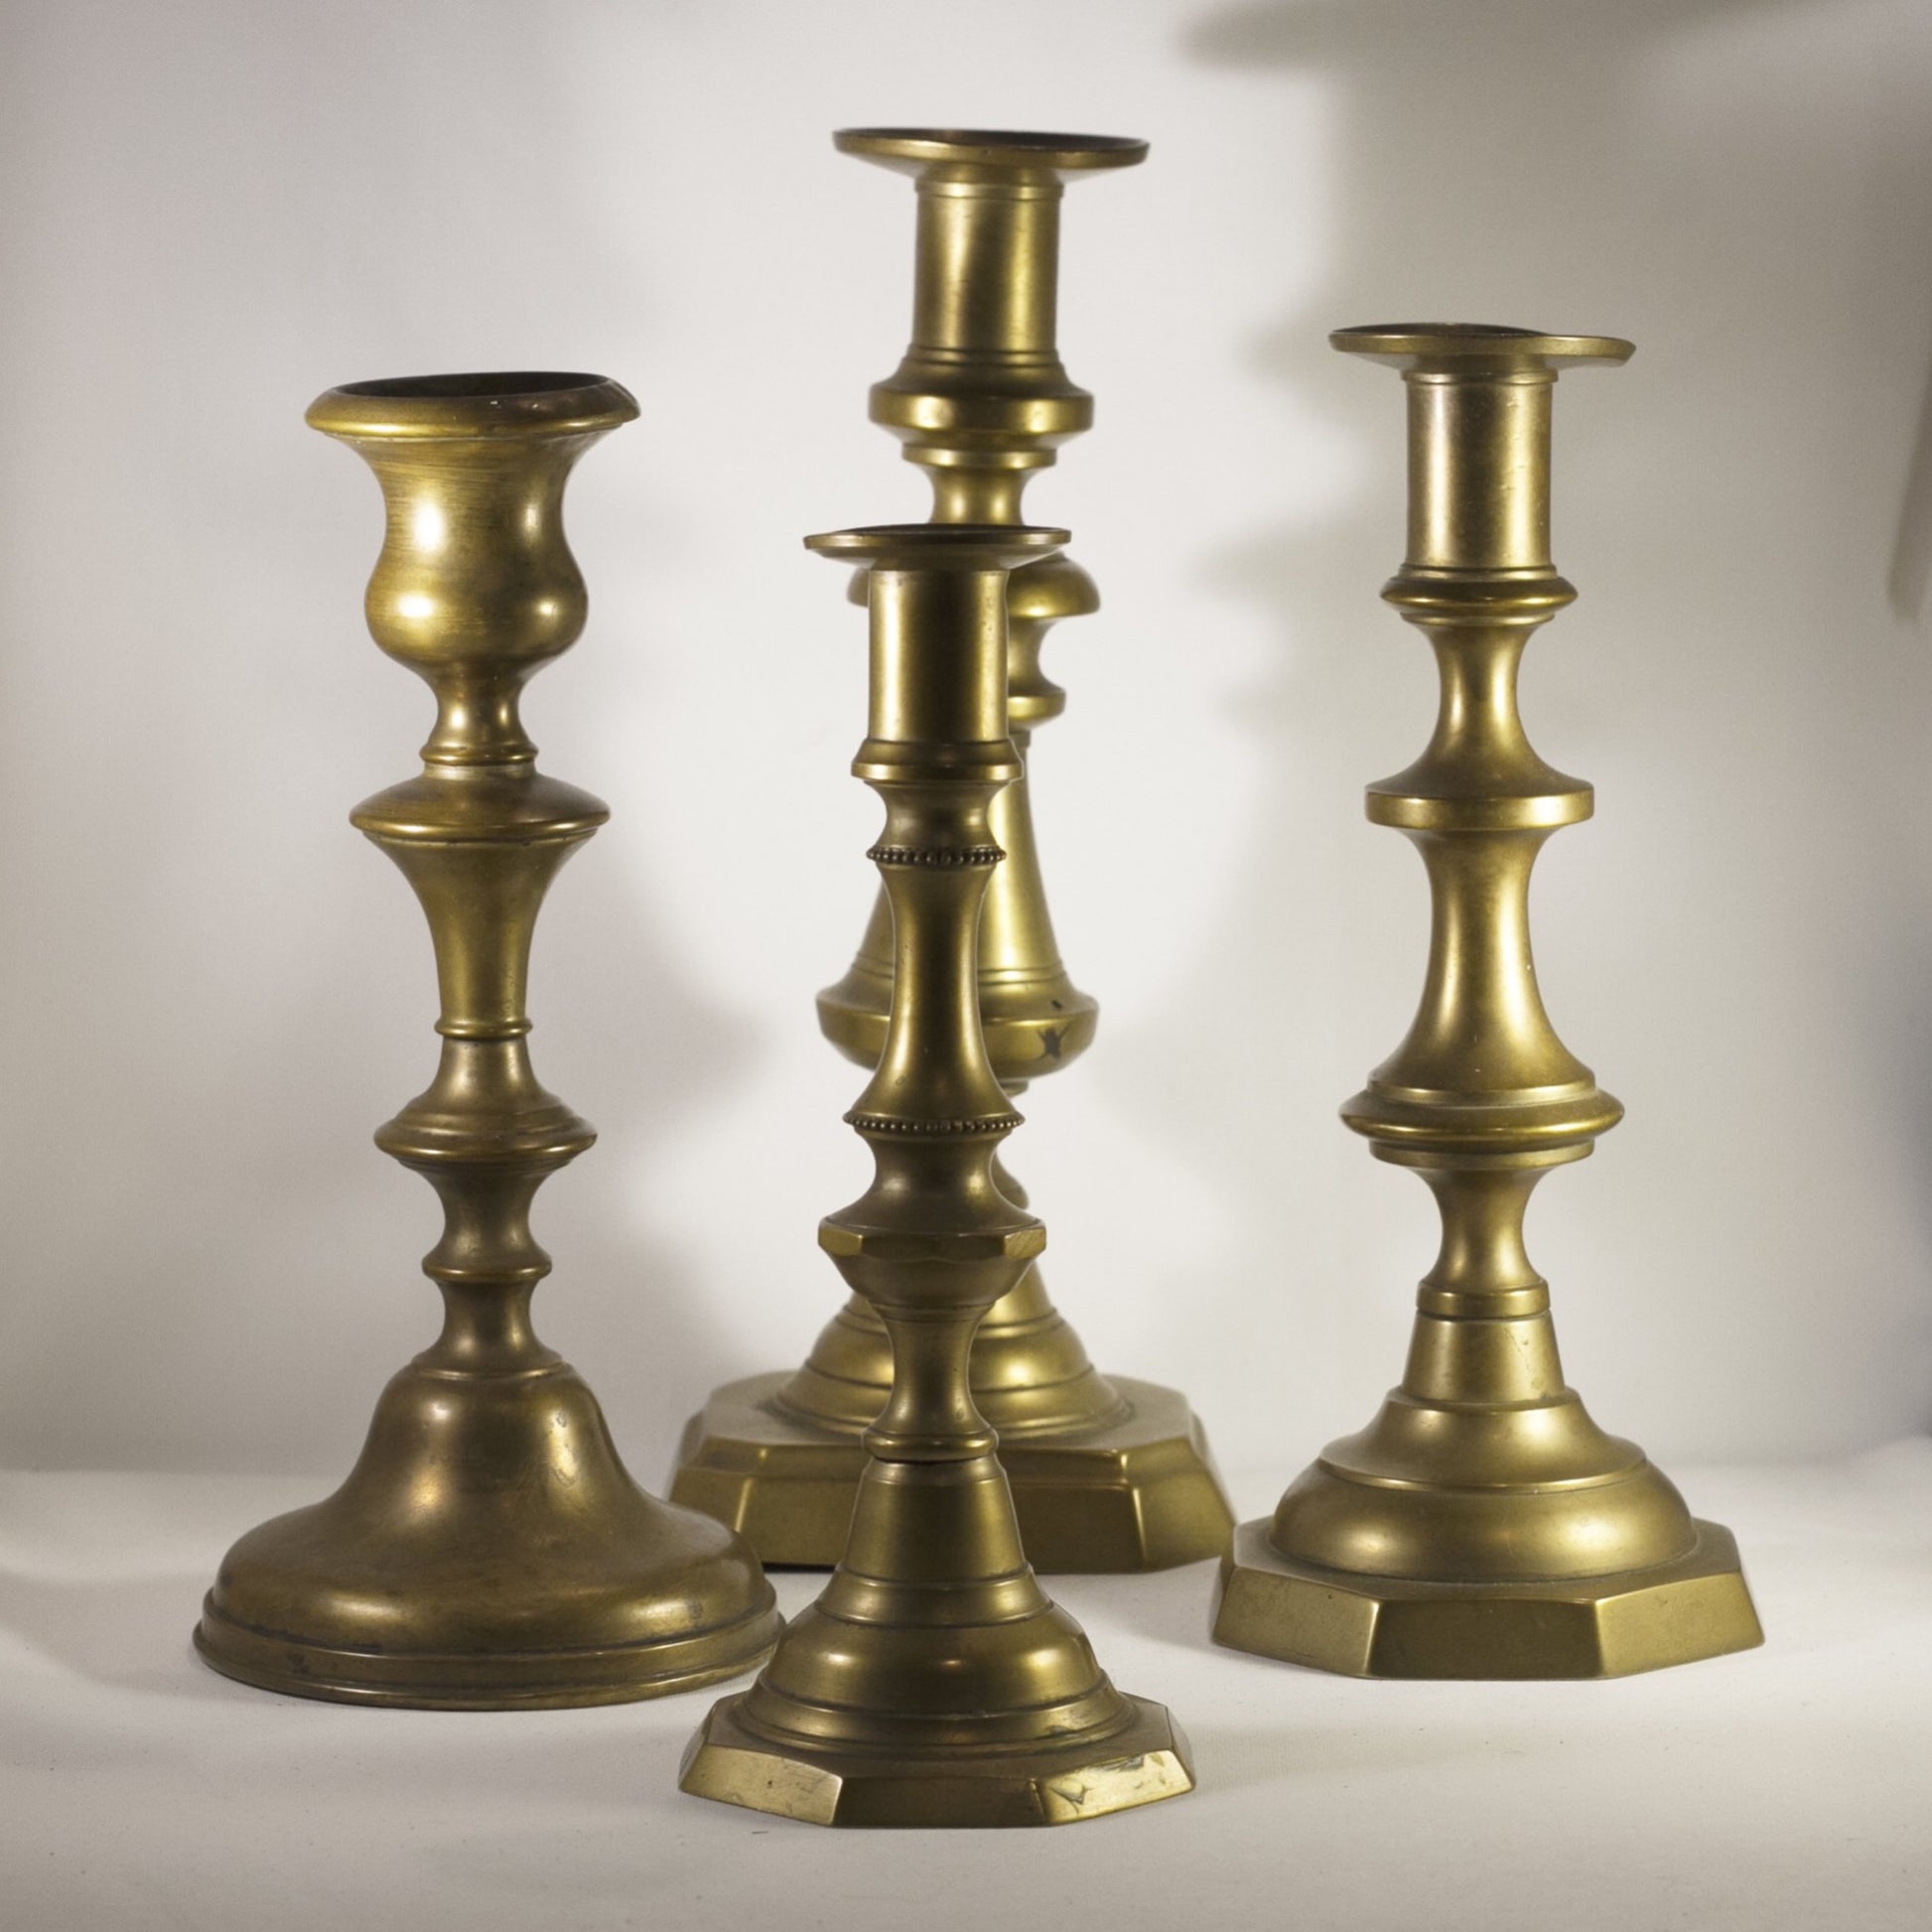 My Brass Candlestick Collection - Better After